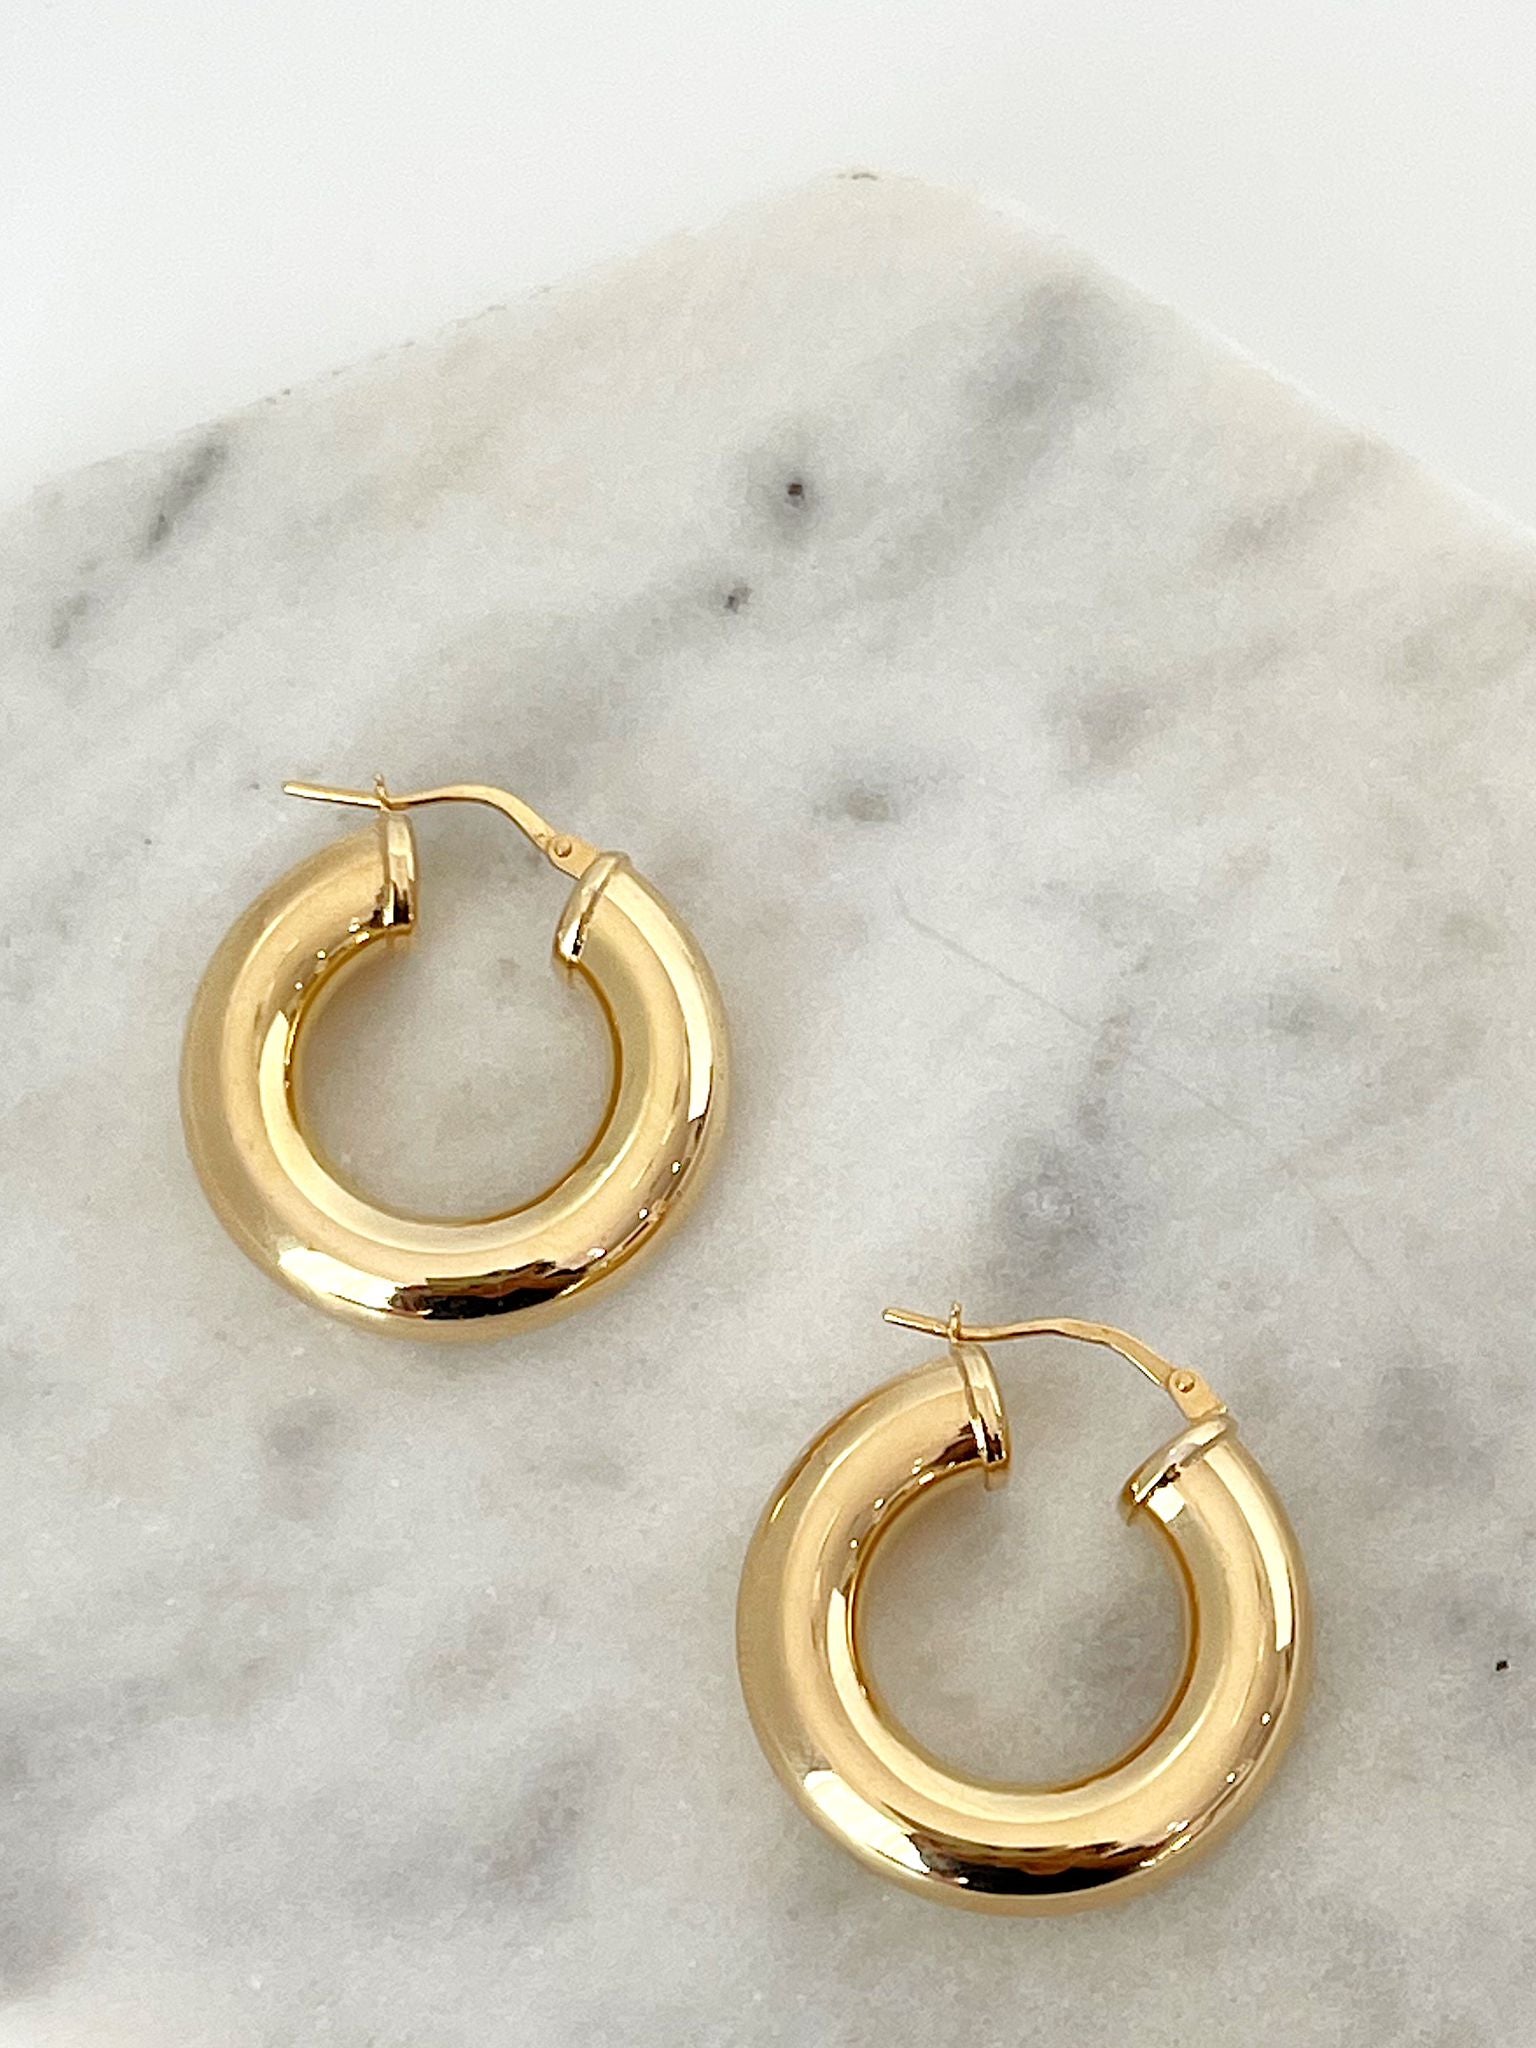 Classic large gold hoops